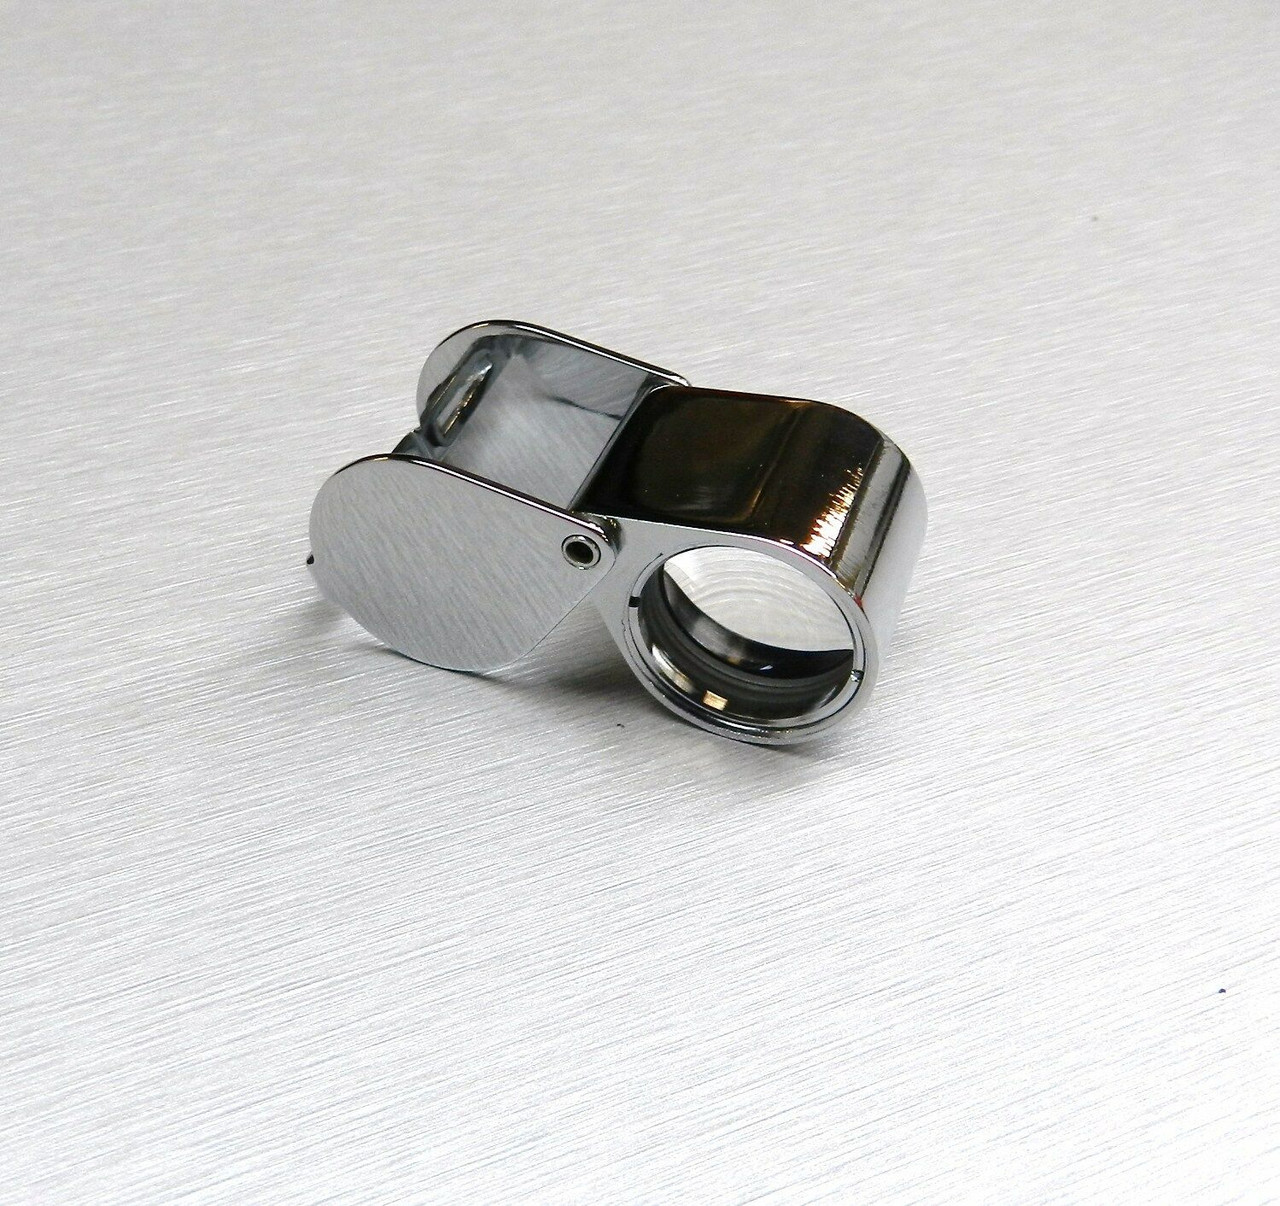 20x Jewelry Loupe Jewelers Triplet 21mm Silver Loupe Leather Case